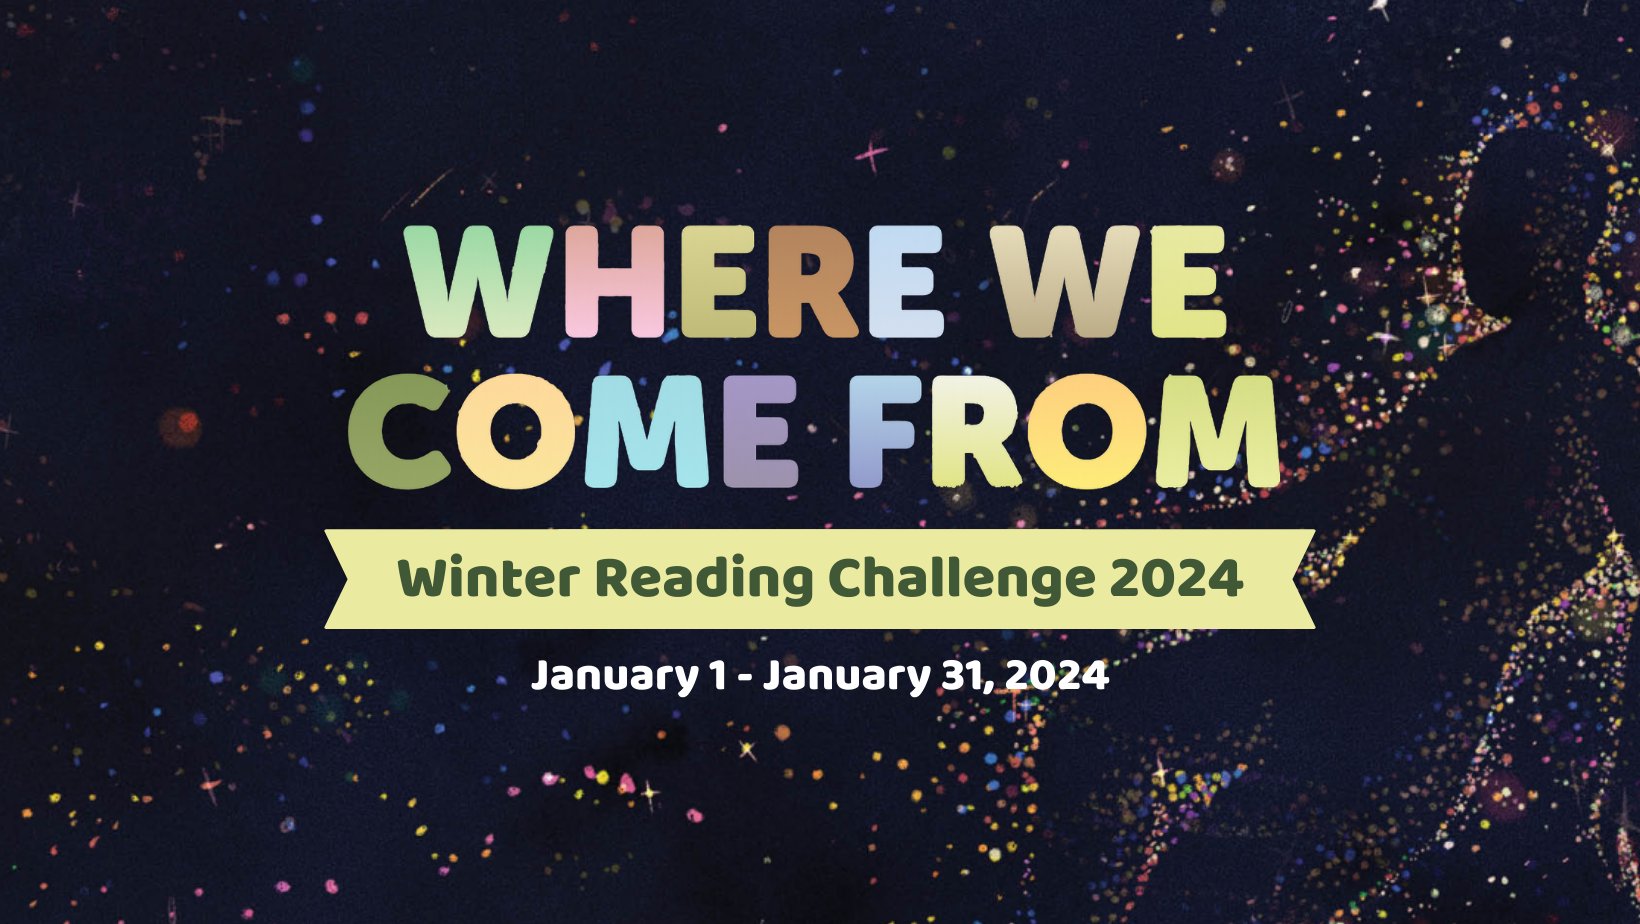 Where we come from: winter reading challenge 2024